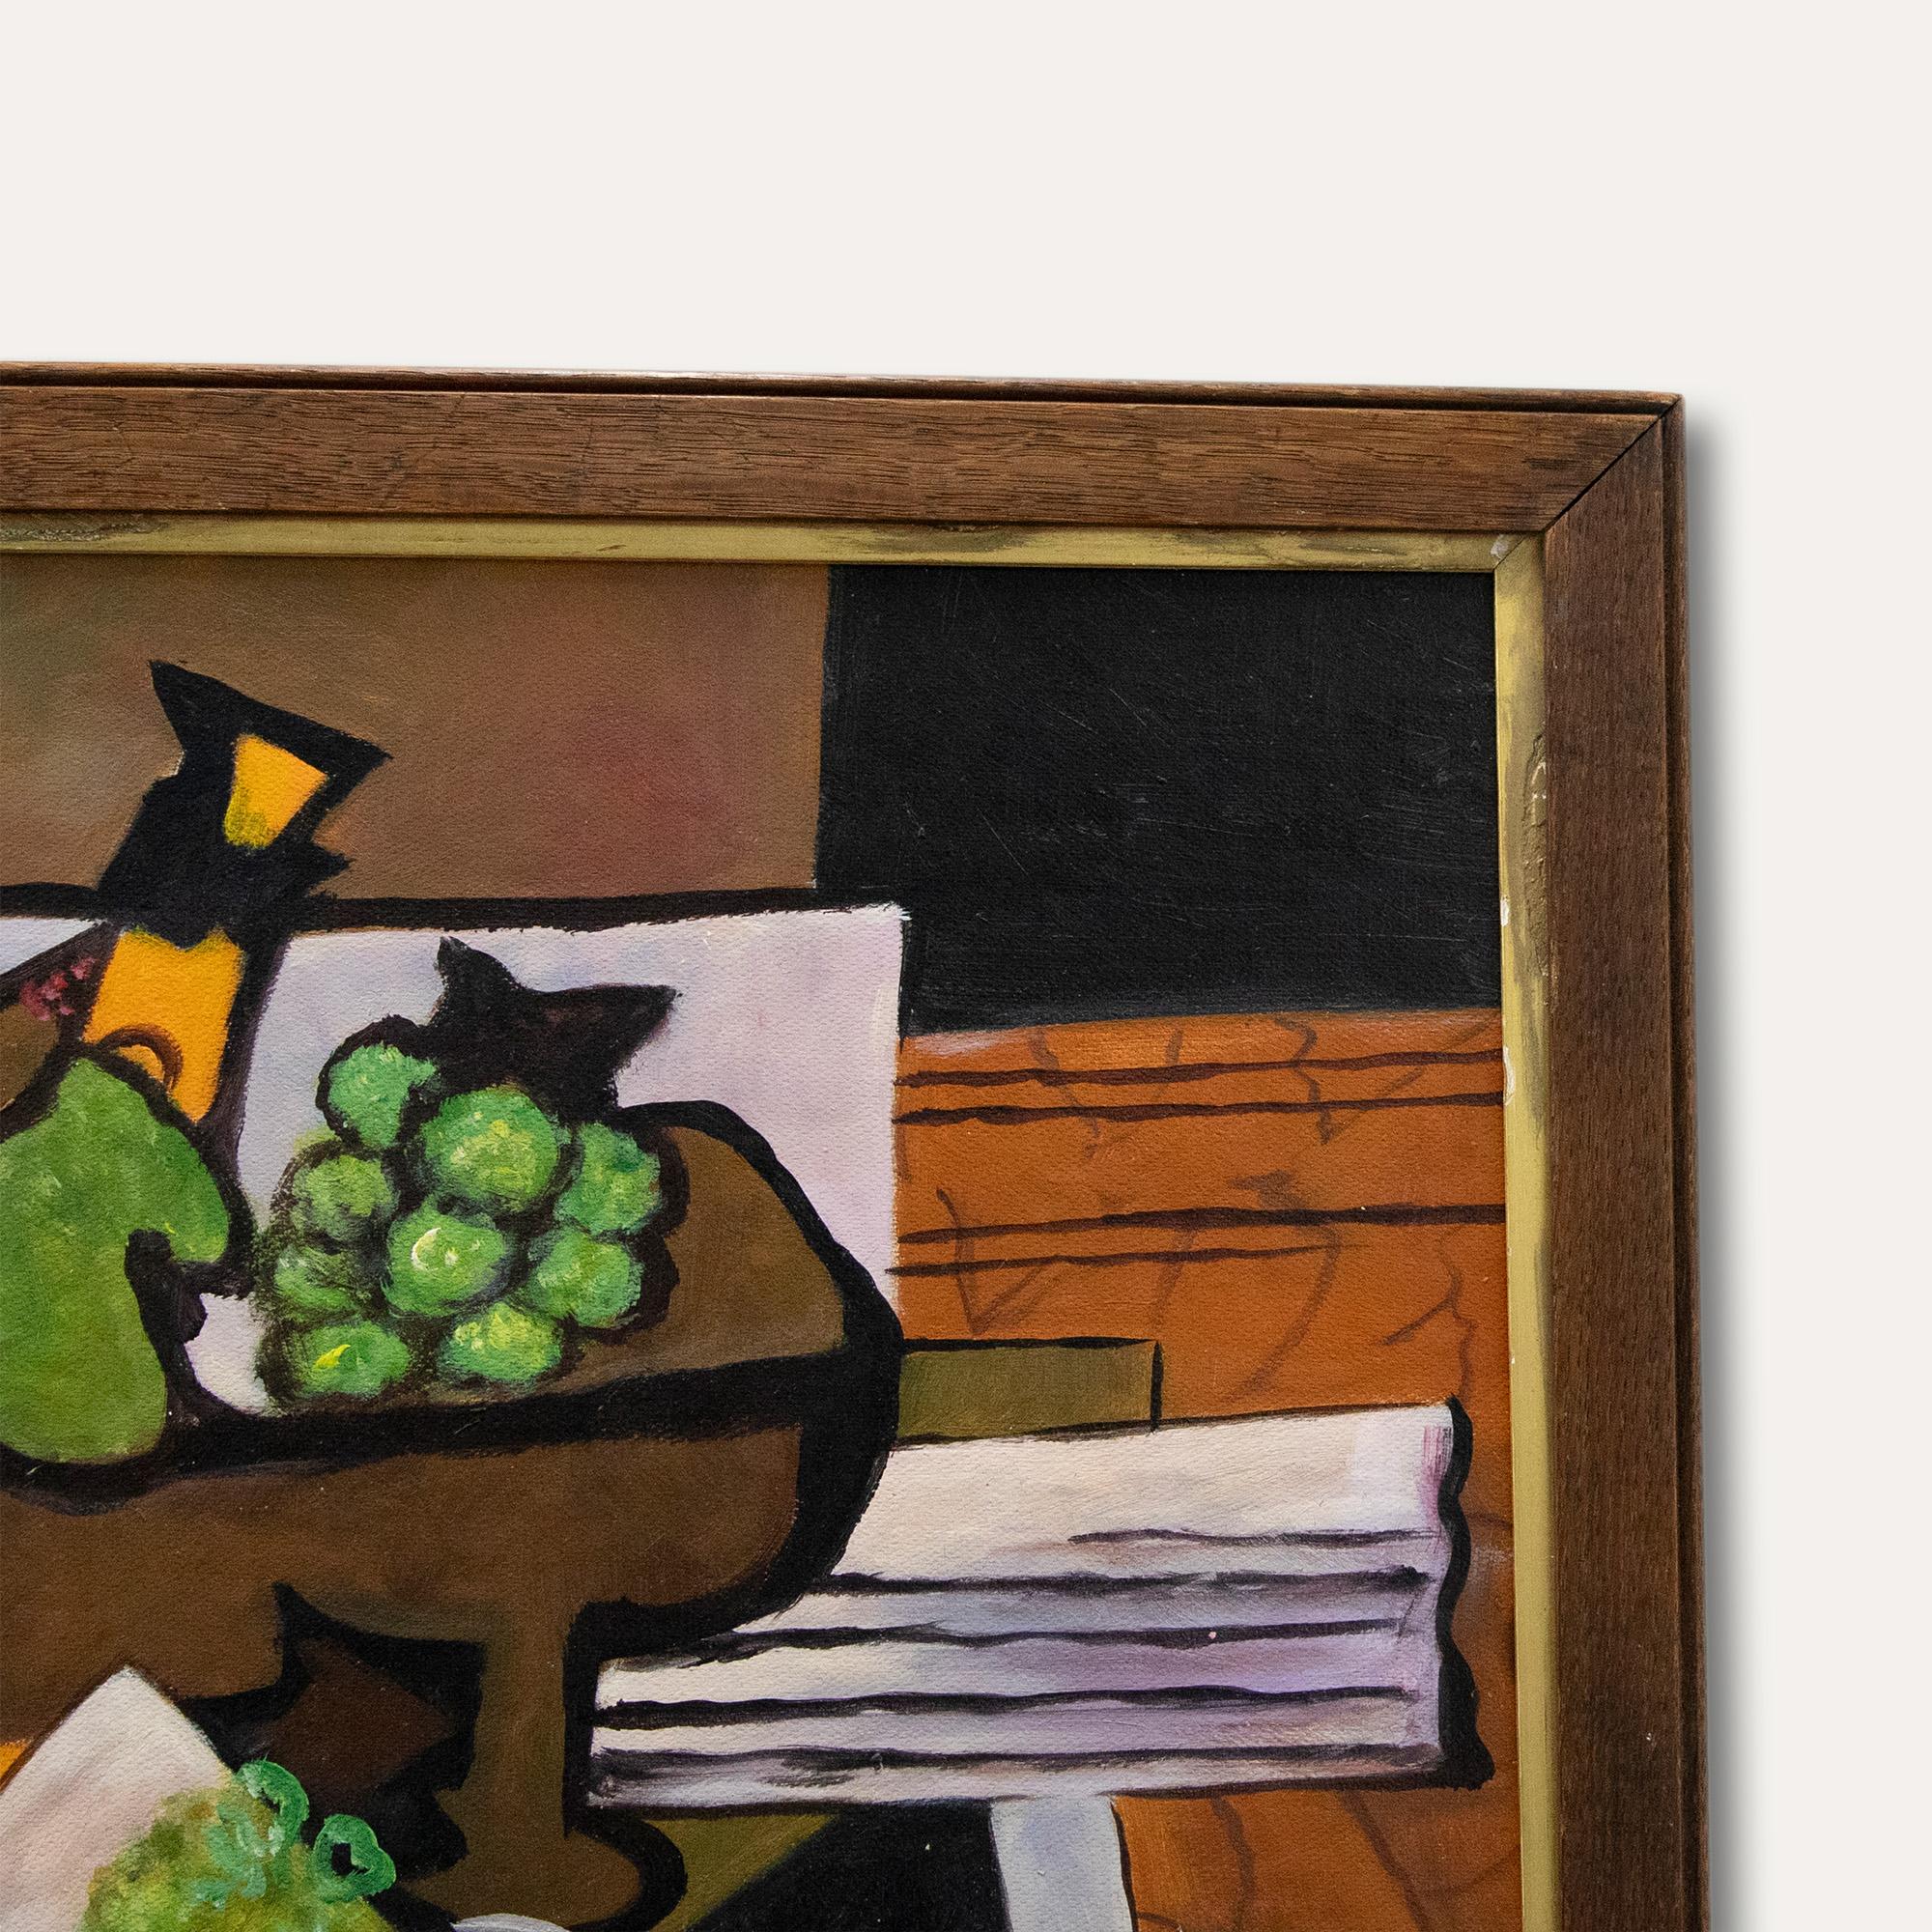 A delightful study of Georges Braque's 1927 study Still Life with Clarinet. This striking abstract piece captures still life objects in vibrant colours and bold forms. Unsigned. Presented in a wooden frame with a gilt slip. On board.